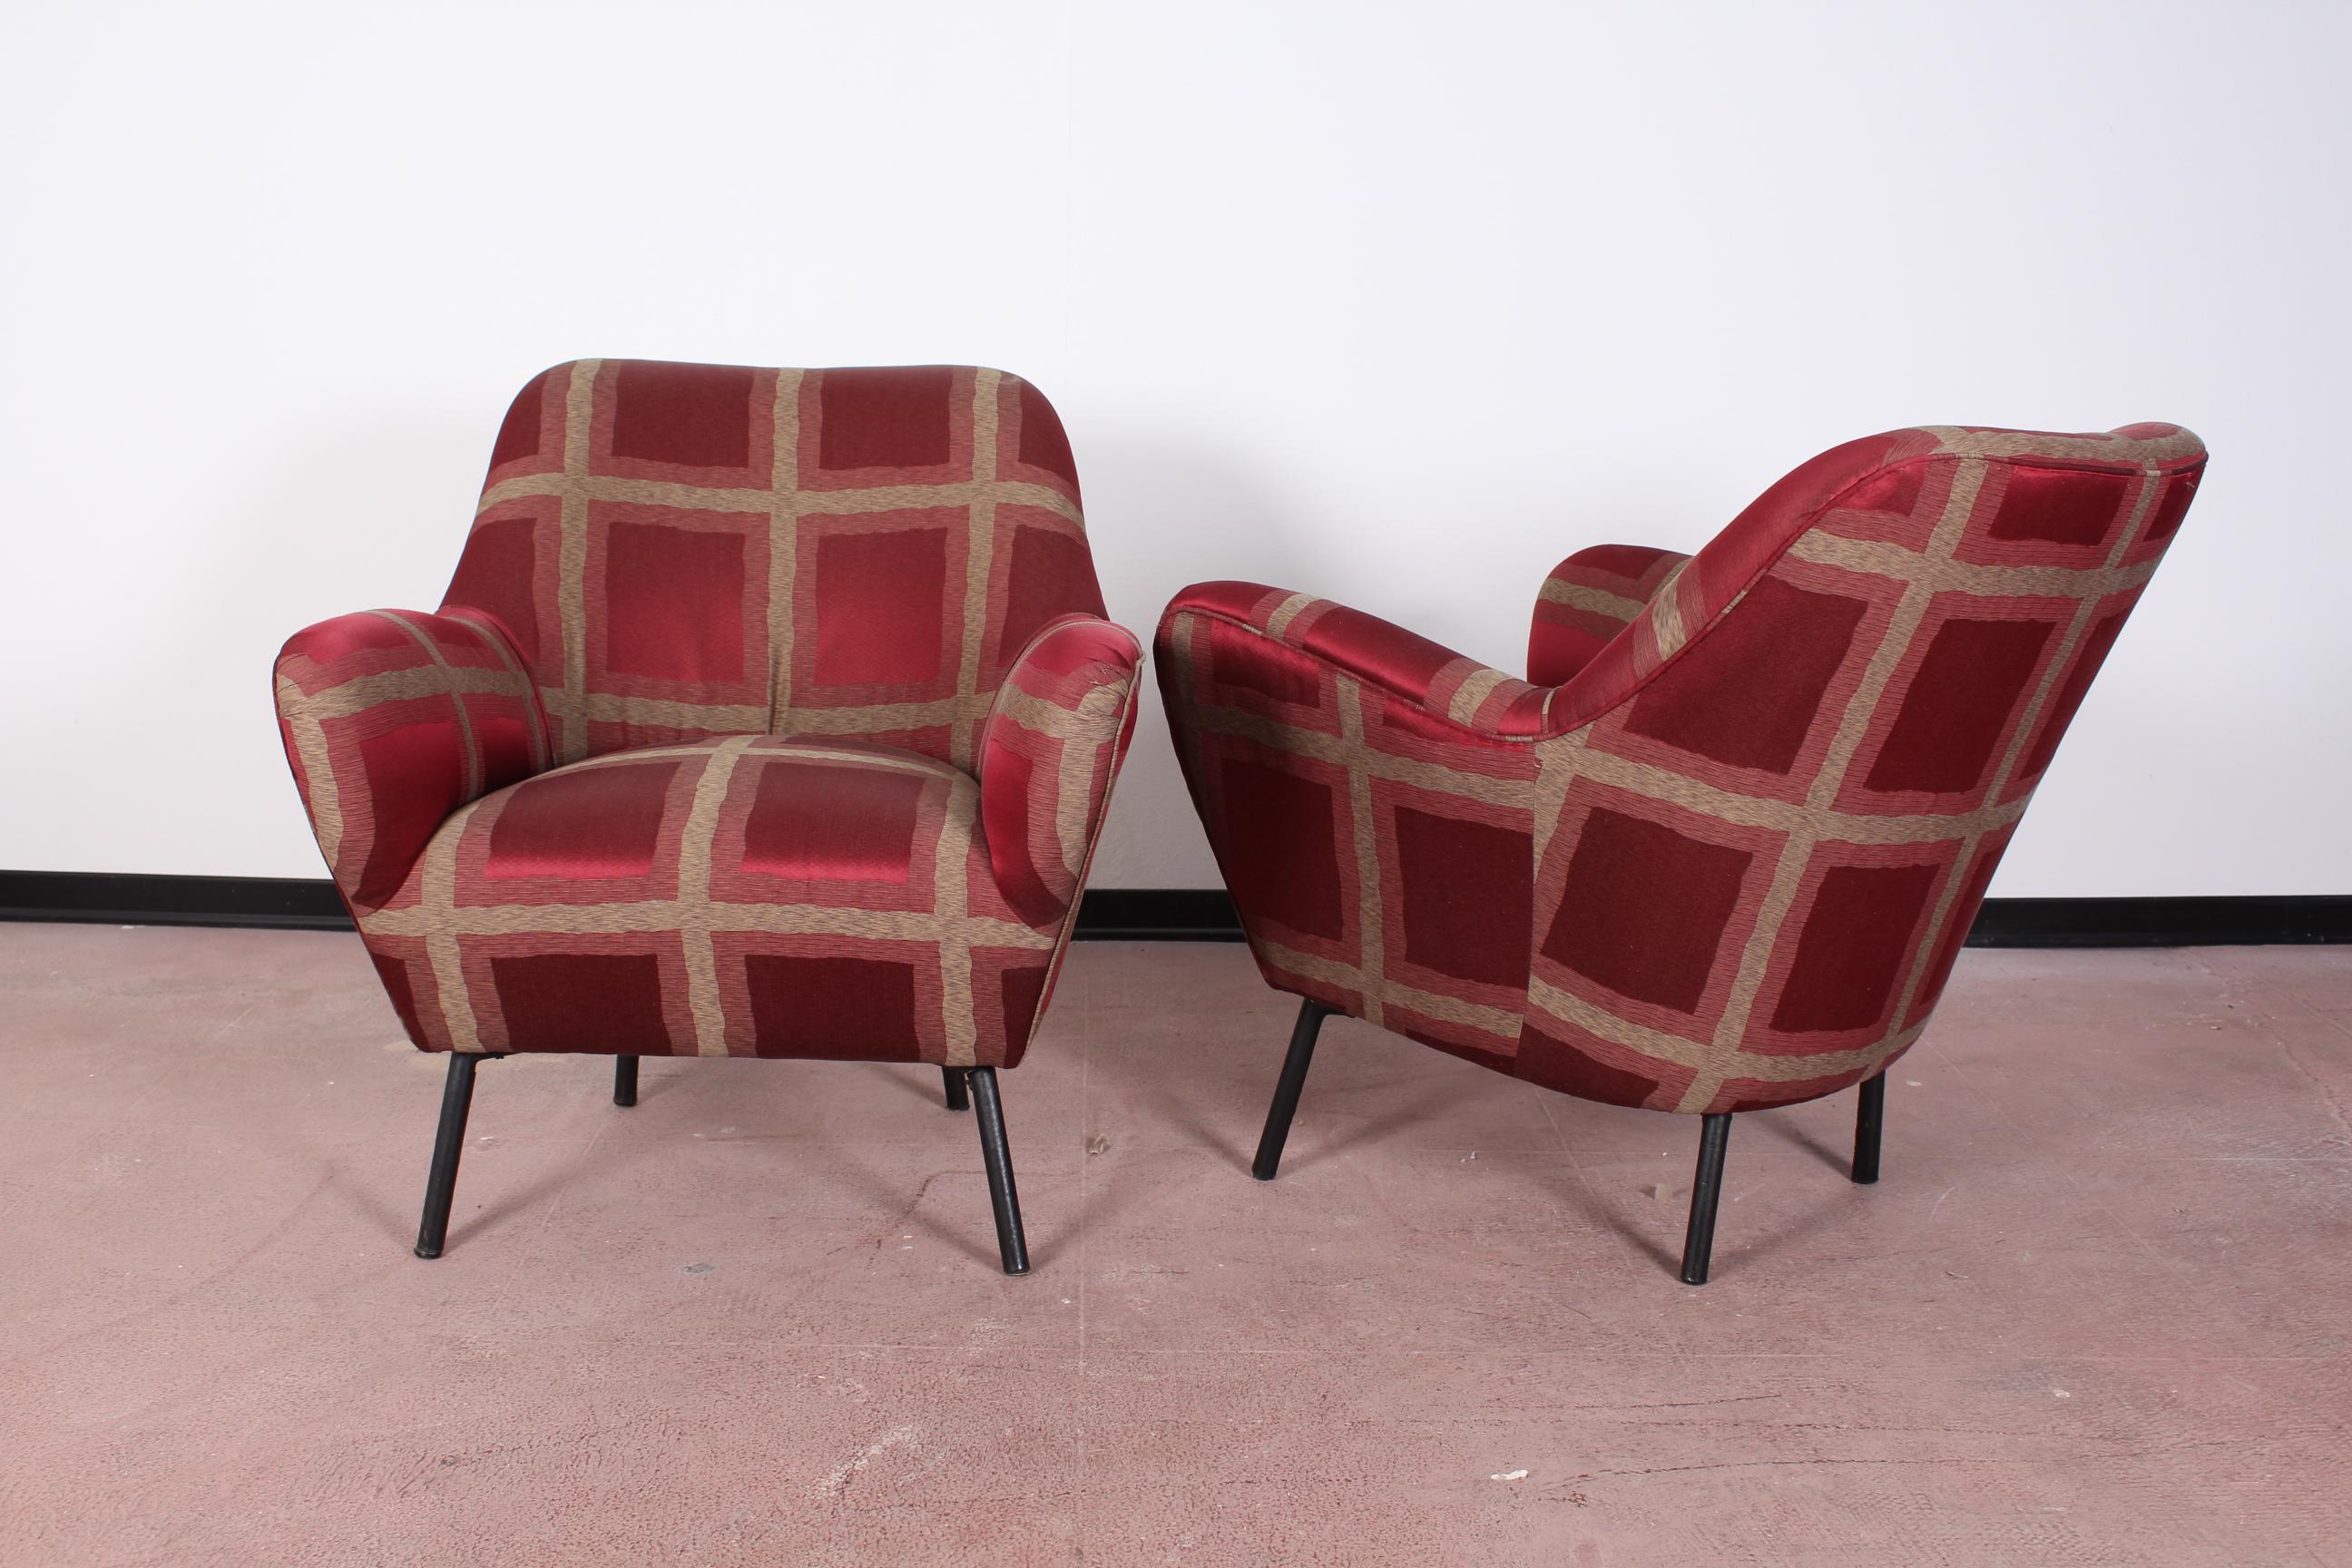 Fabric O. Borsani Mid-Century Red Checked Satin Pair of Armchairs, Italy 1950s For Sale